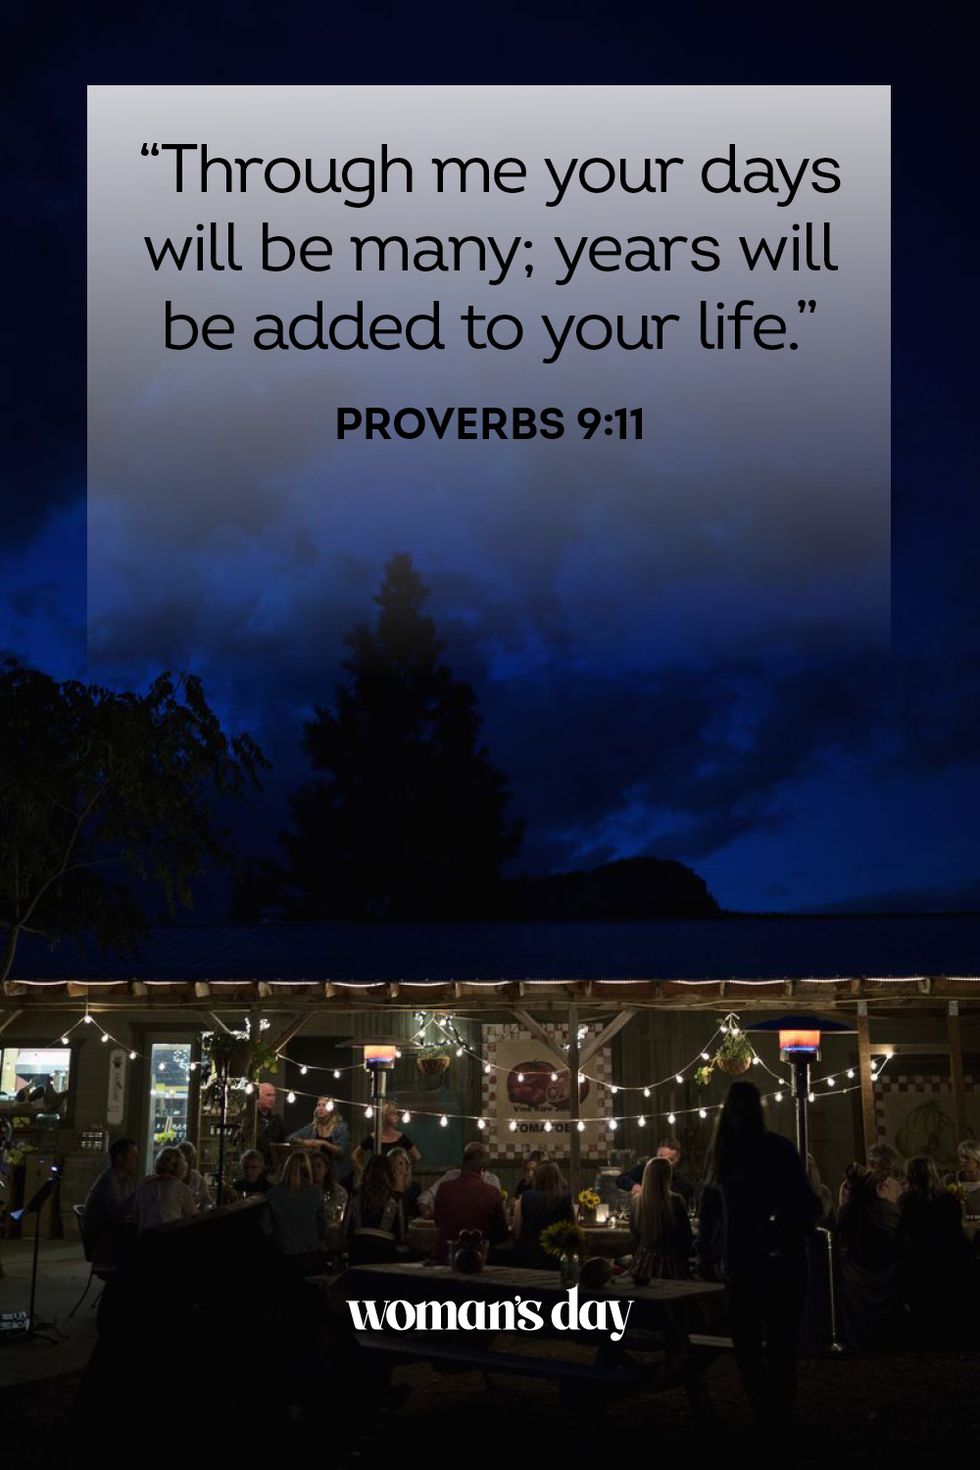 bible verses for birthdays proverbs 9 11